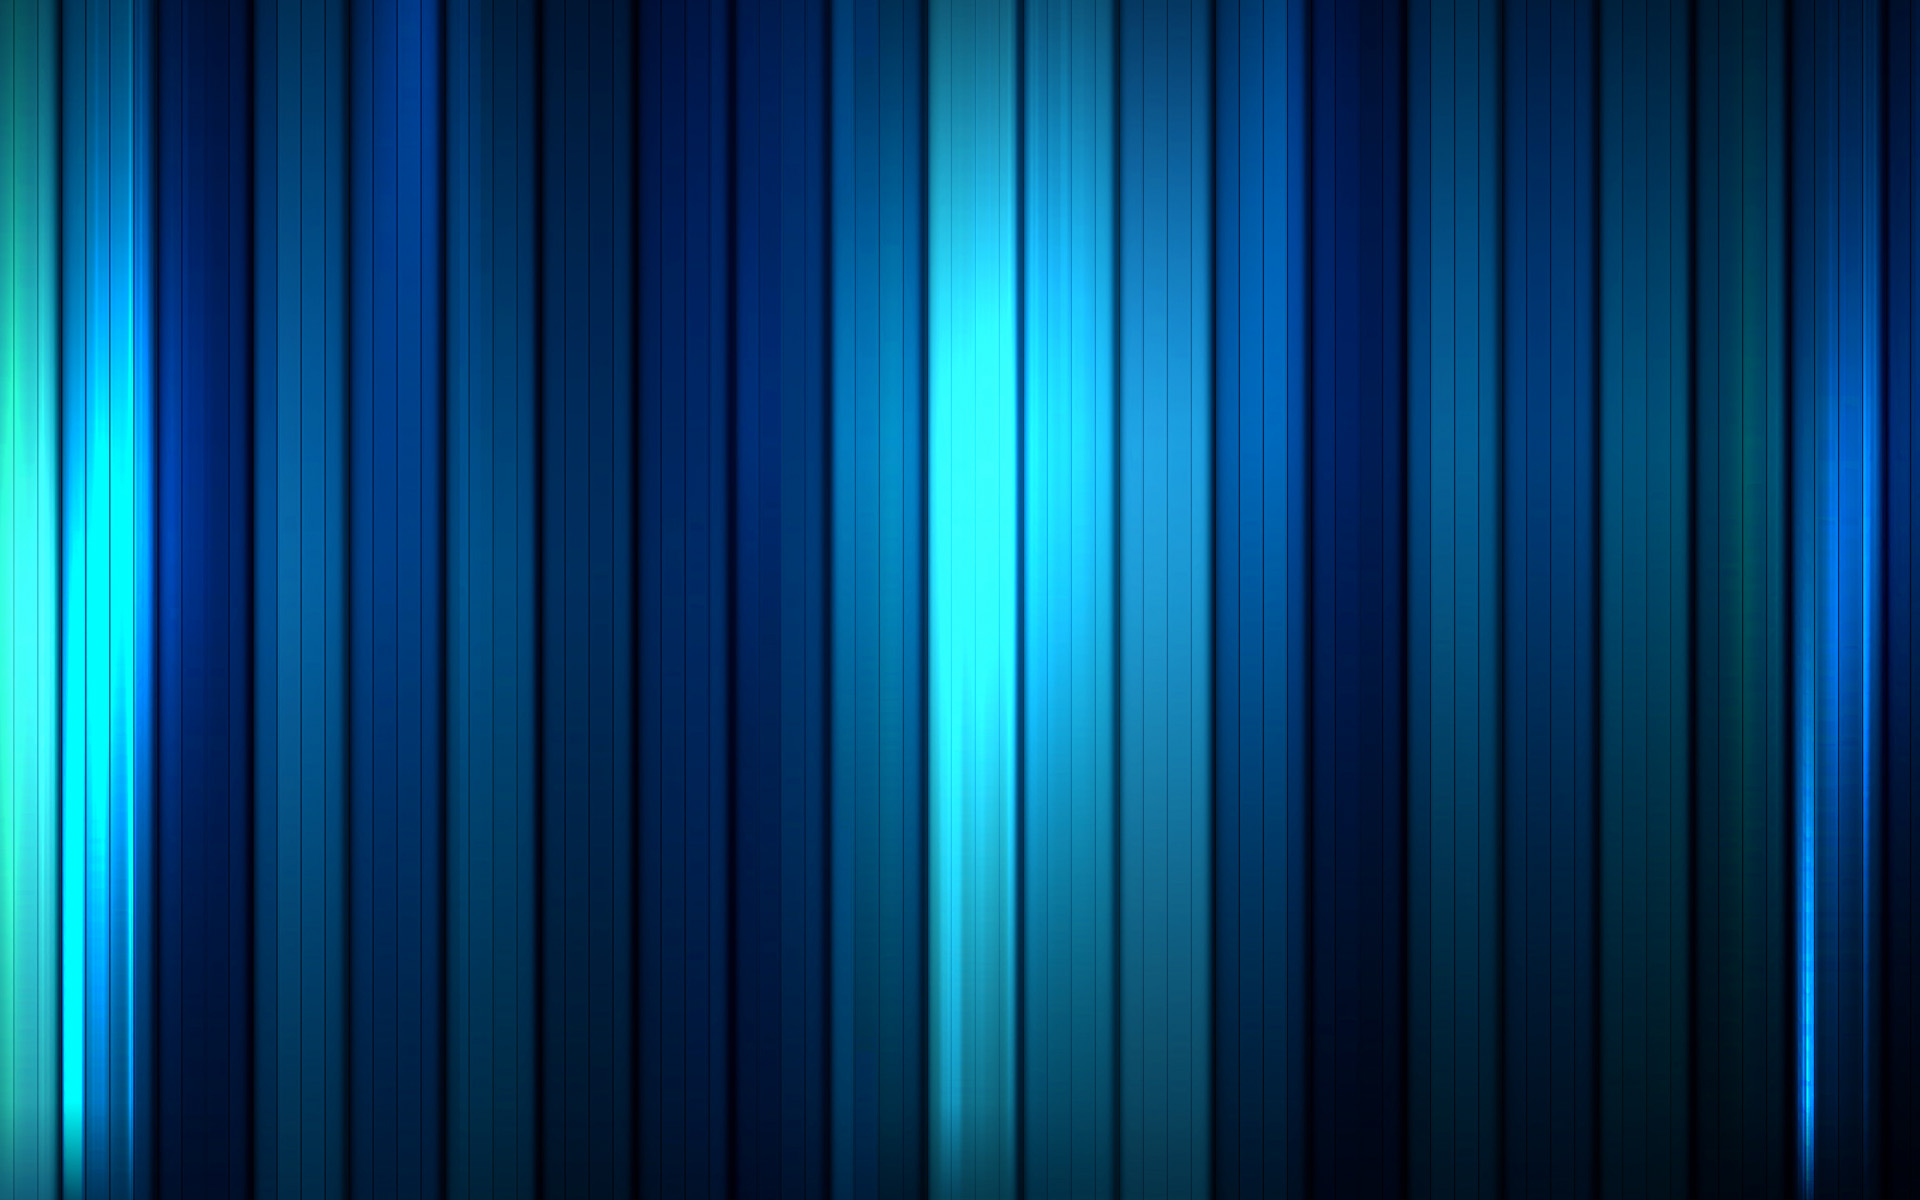 Motion Stripes Best Background Full HD1920x1080p, 1280x720p, – HD Wallpapers Backgrounds Desktop, iphone & Android Free Download